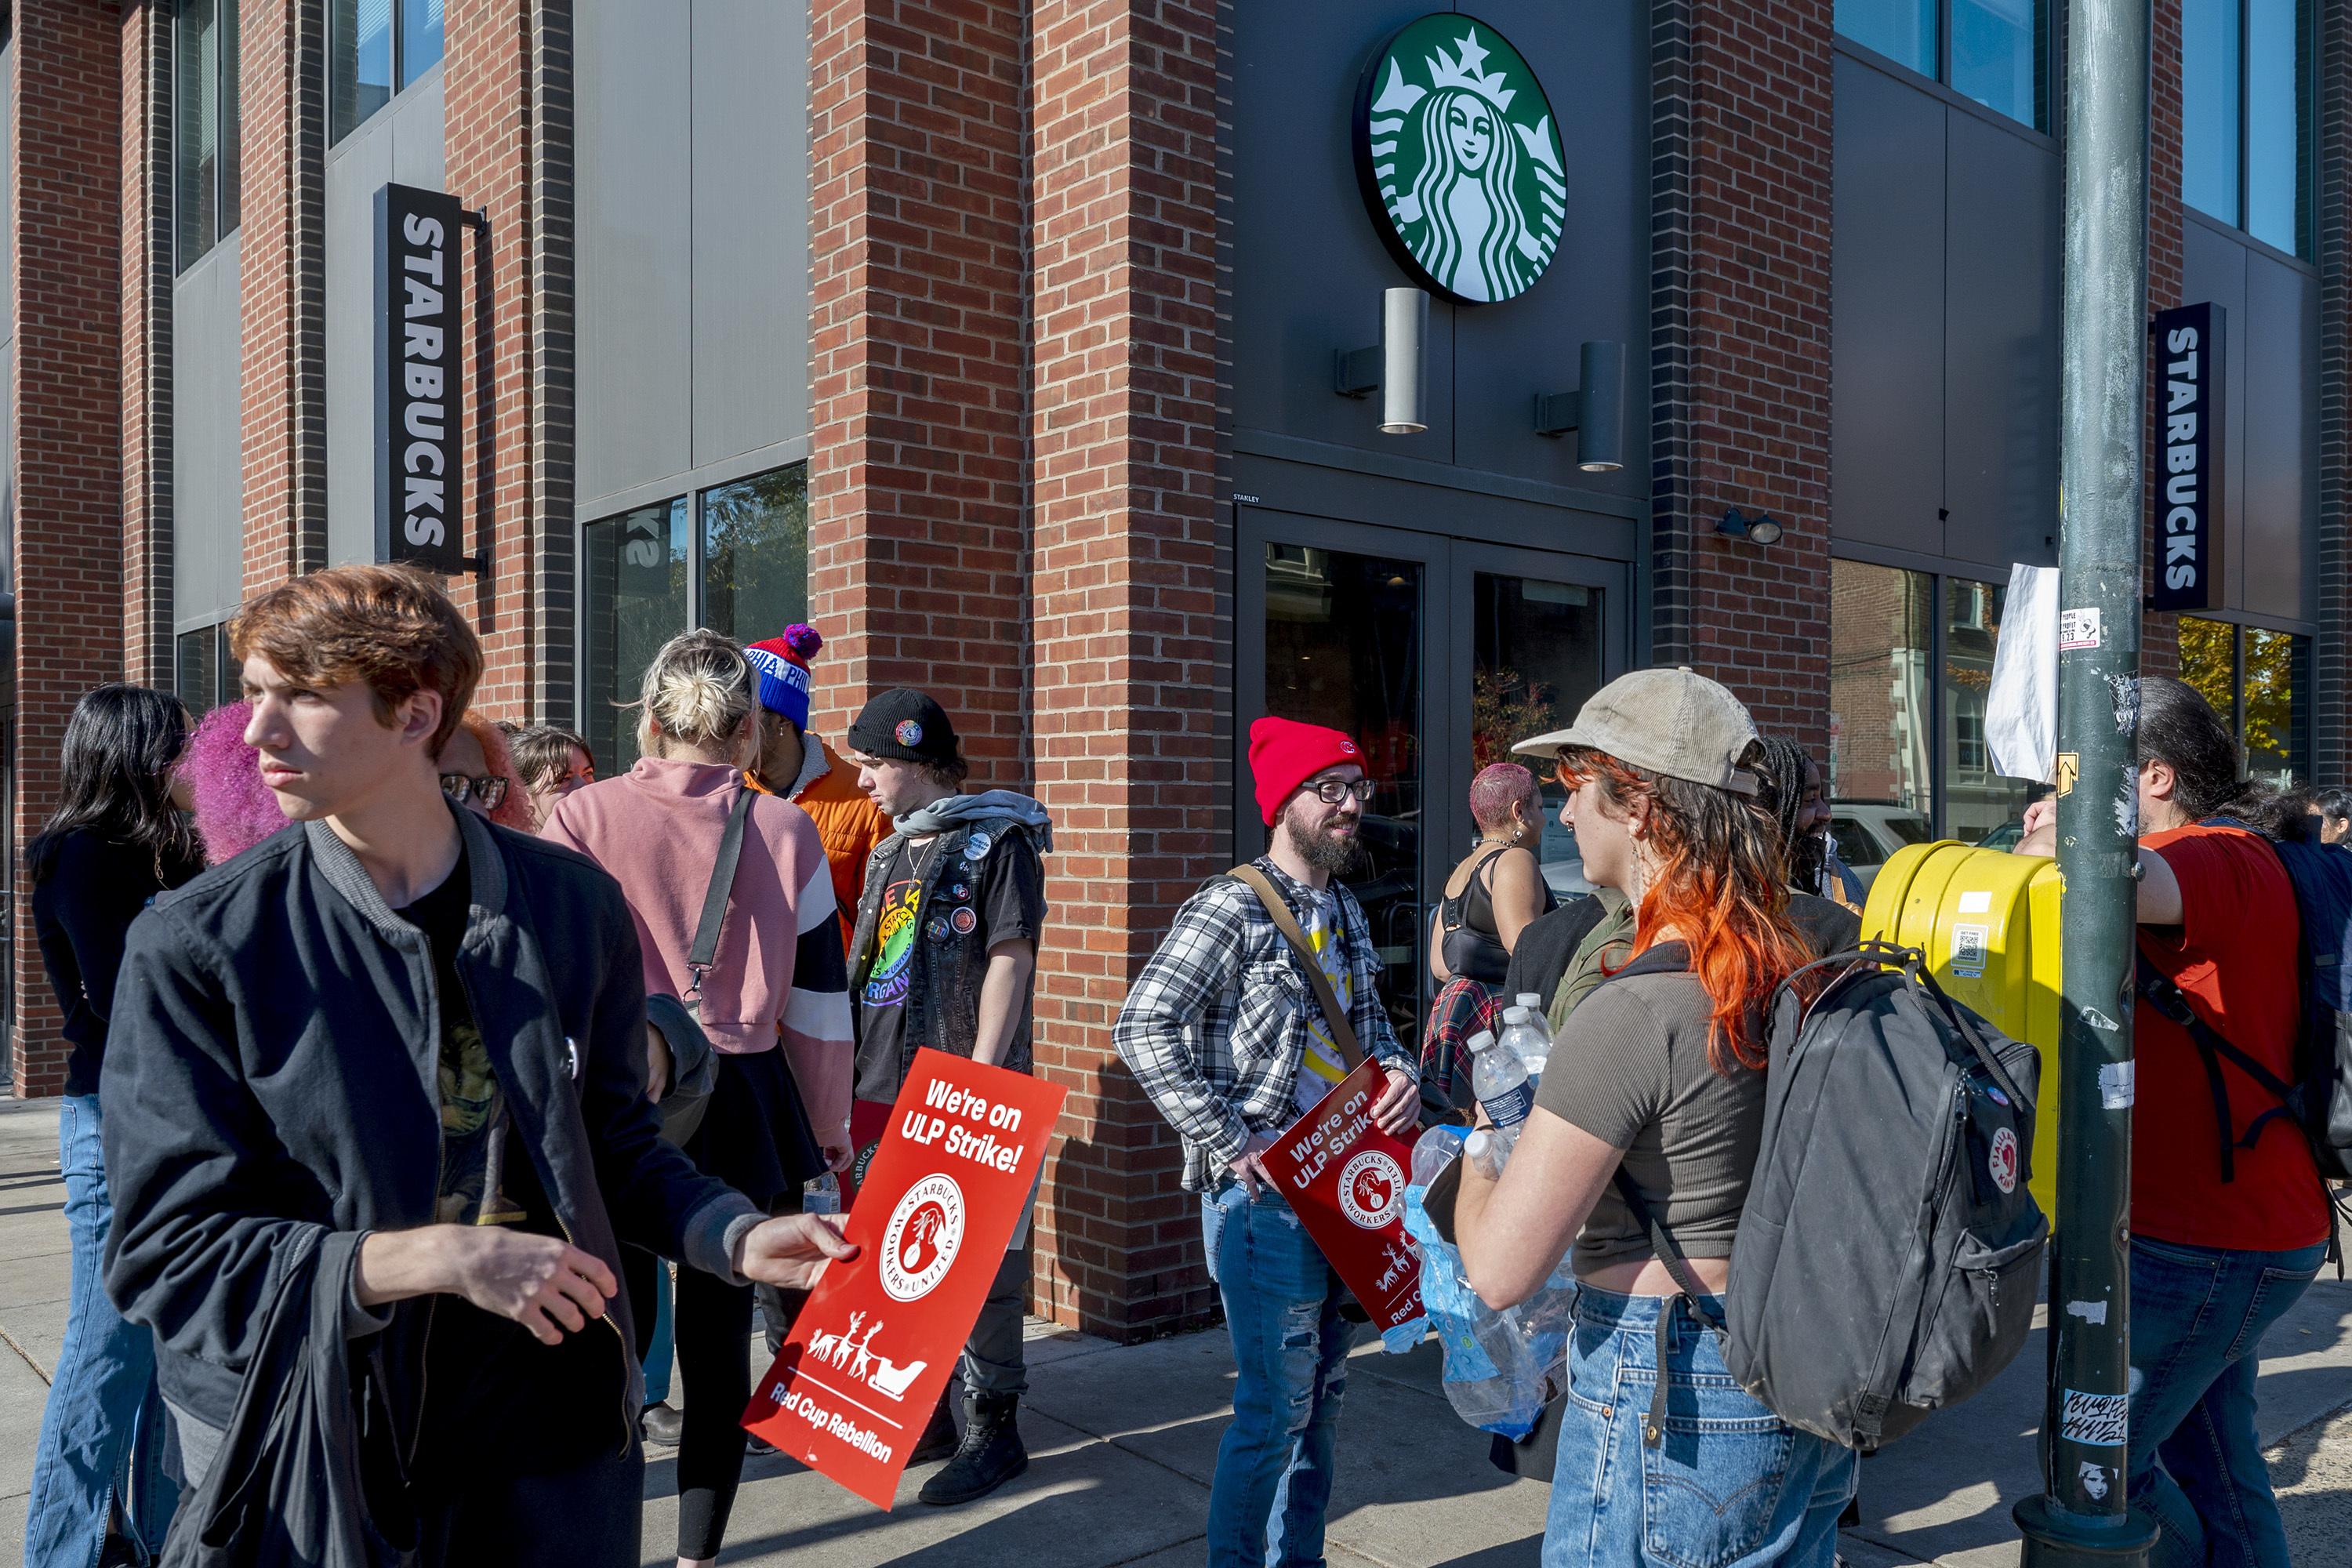 Starbucks Red Cup Day 2023: When can you get your free red cup? What is Red  Cup Rebellion strike? 